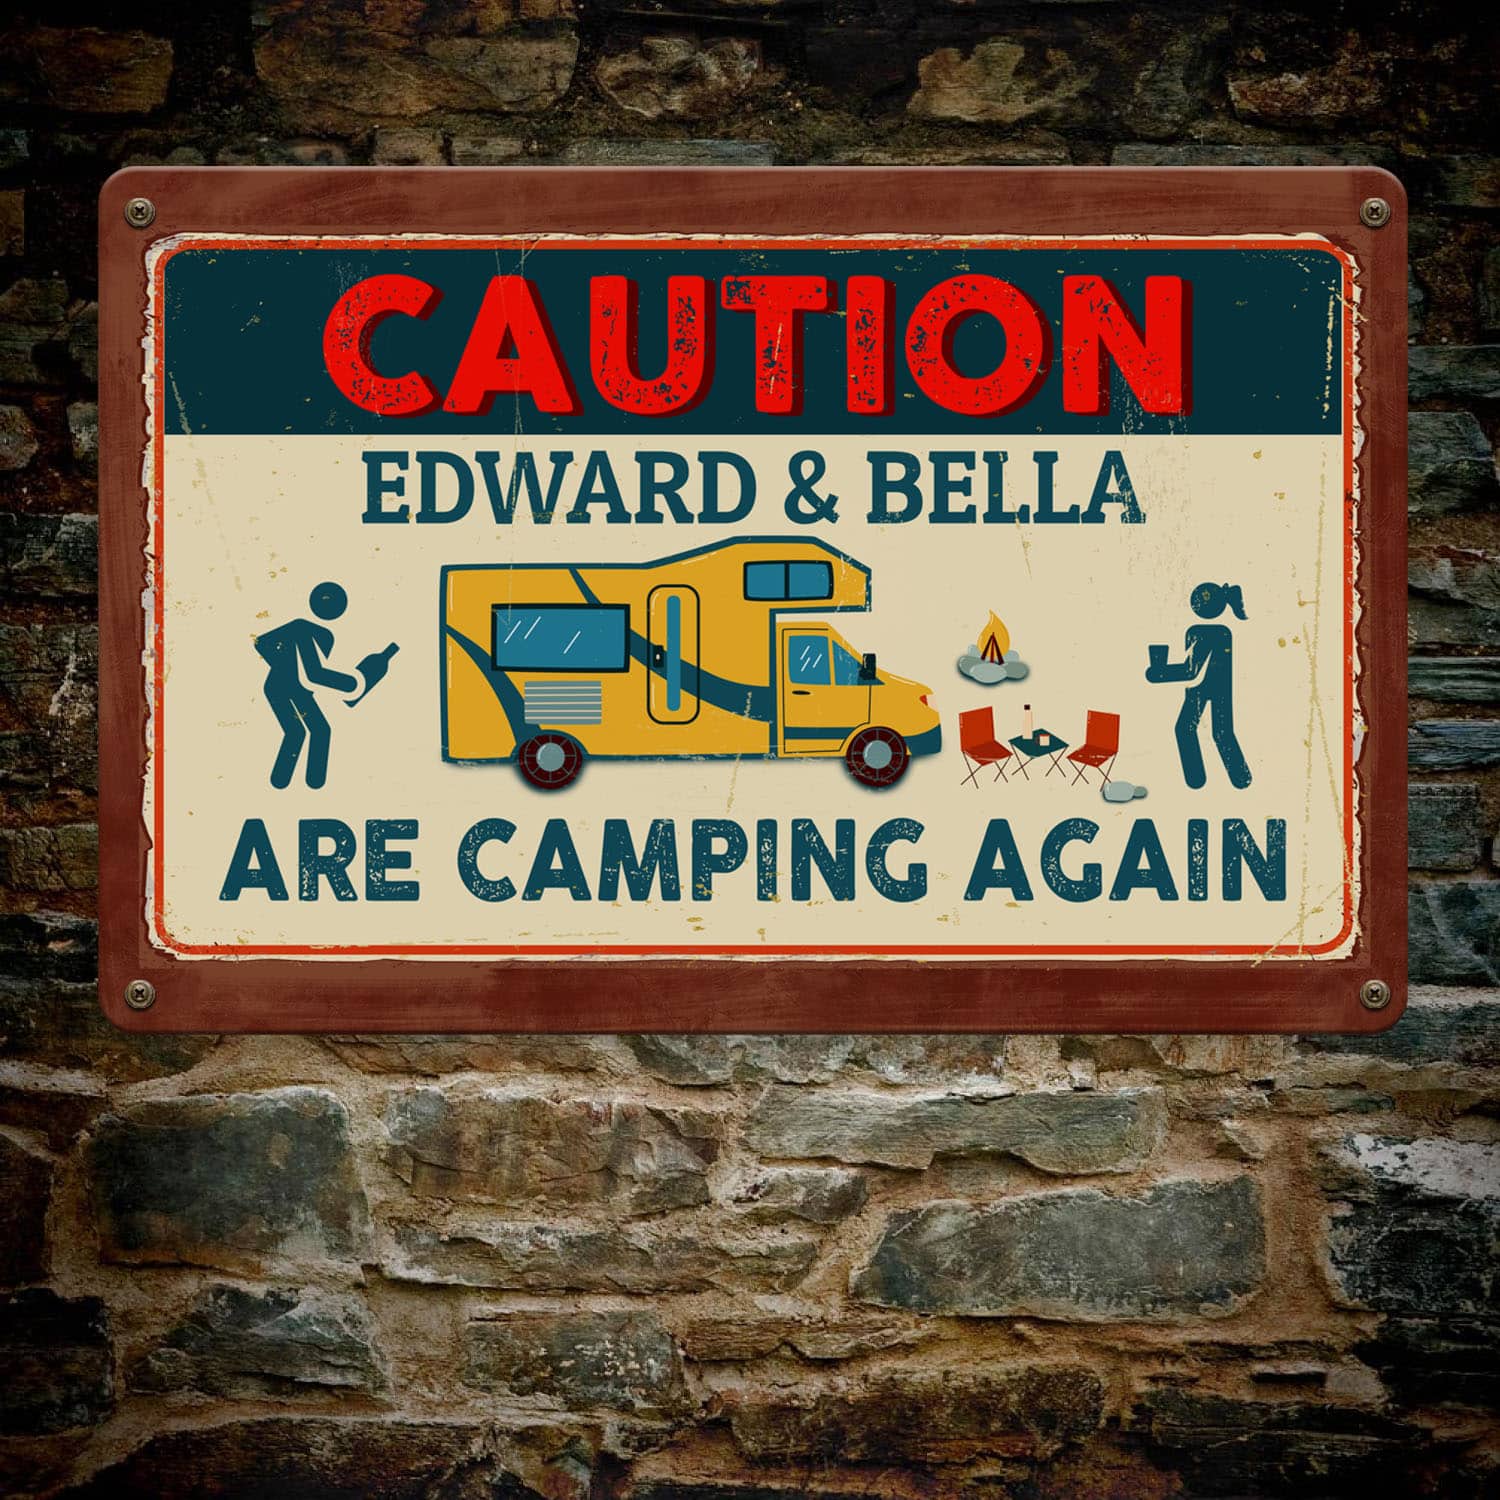 Camping Sign Personalized Caution We Are Camping Again Funny Vintage Decorative Metal Sign – Indoor Outdoor Decor